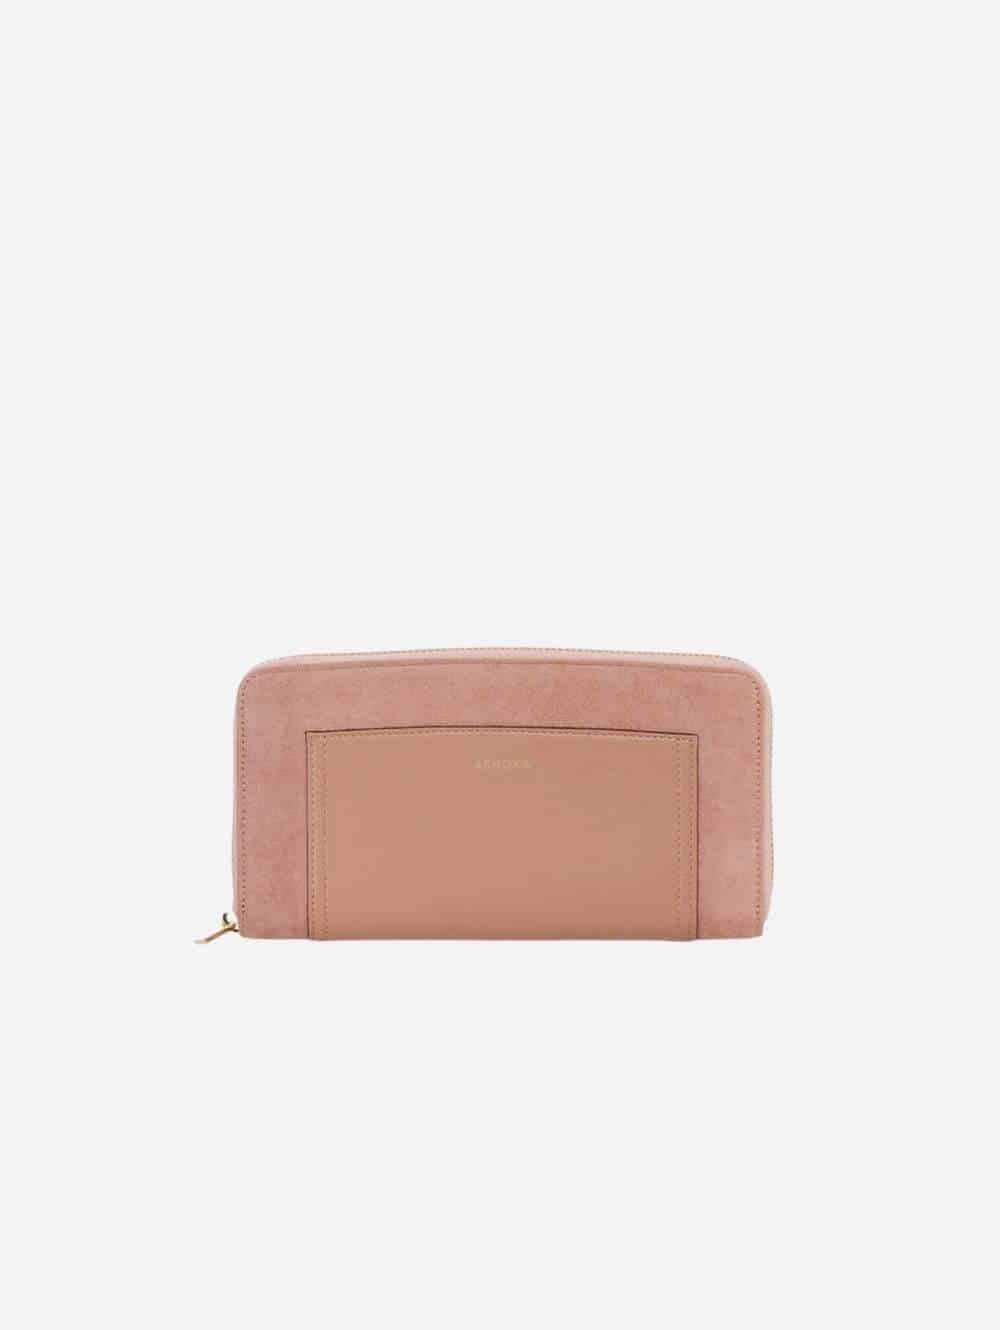 Pink and tan wallet with zipper